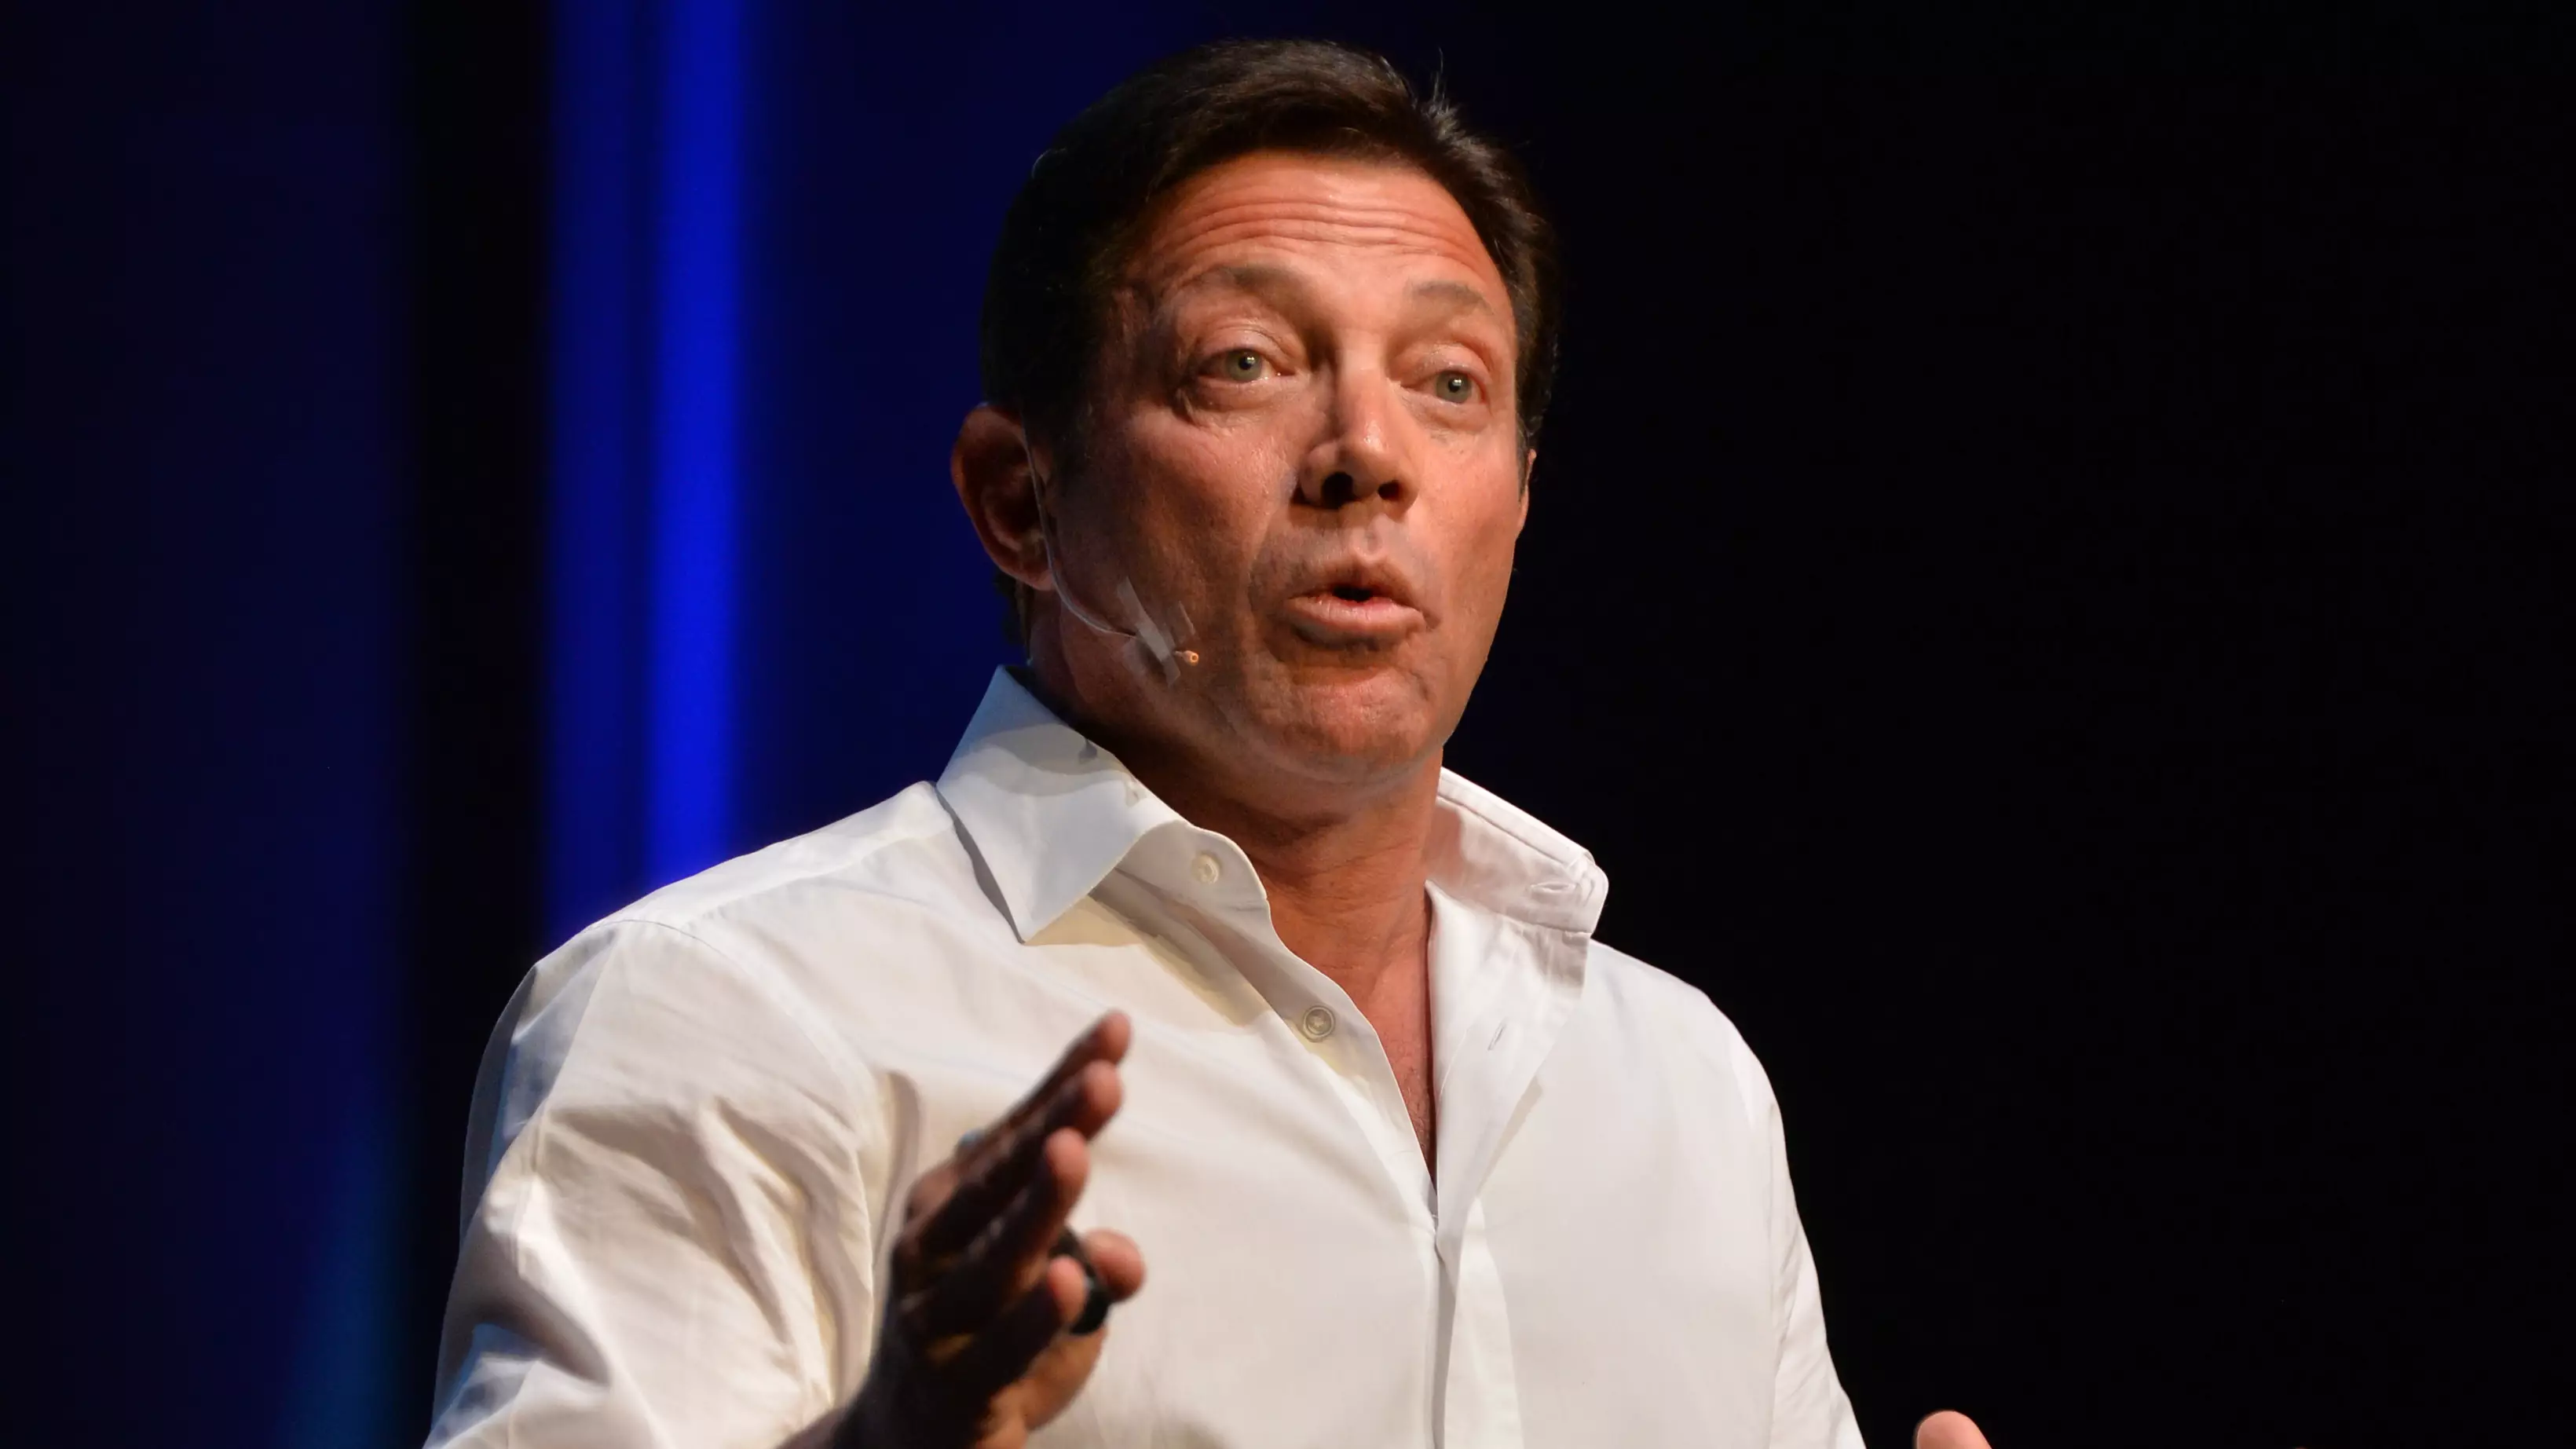 Real-Life Wolf Of Wall Street Warns GameStop Investors To 'Be Careful'